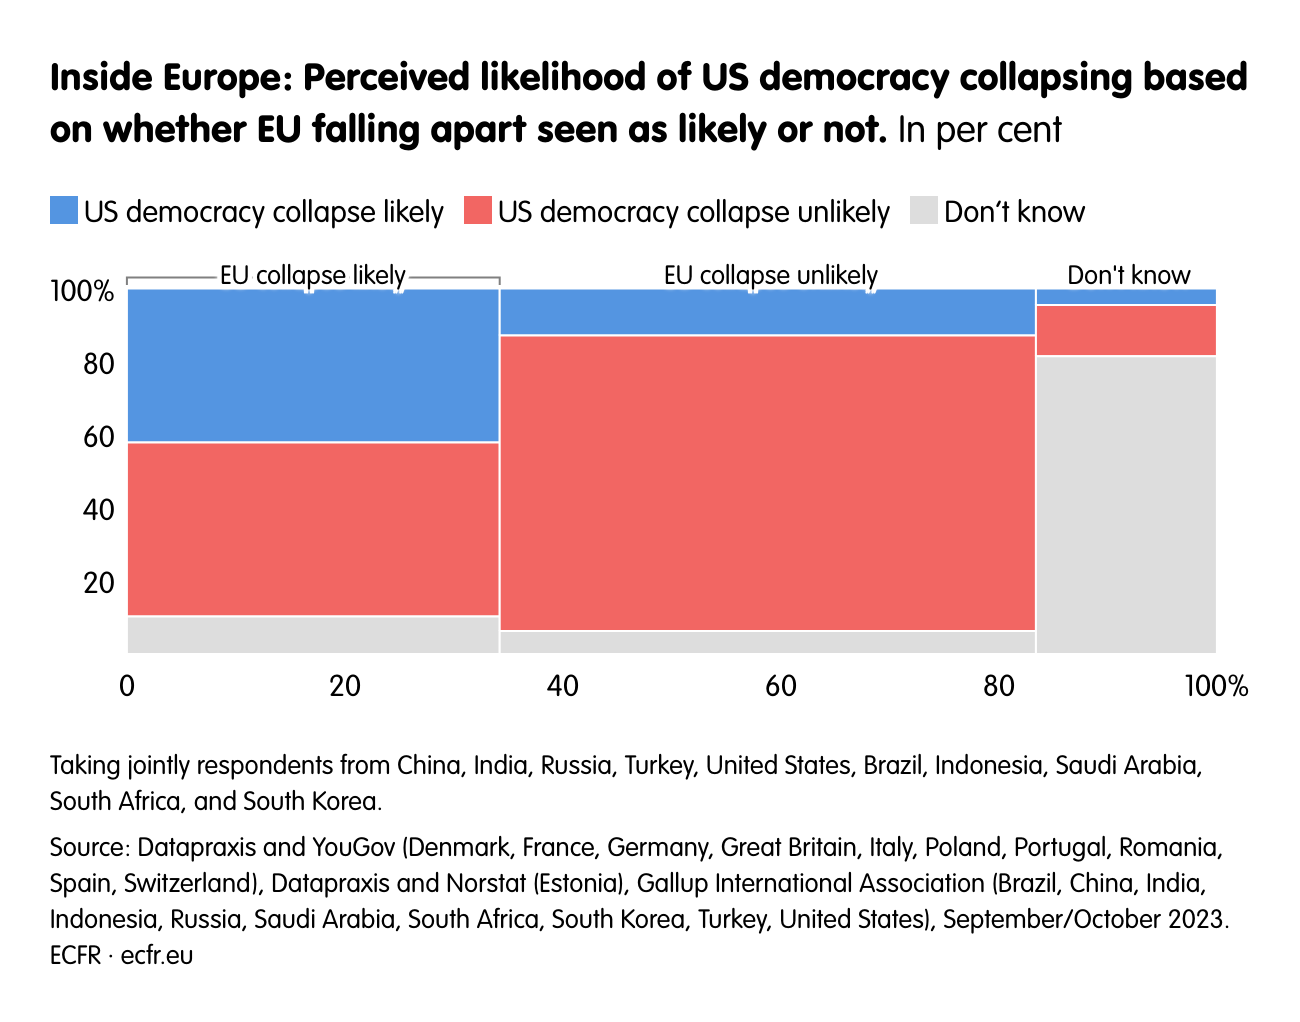 Inside Europe: Perceived likelihood of US democracy collapsing based on whether EU falling apart seen as likely or not.